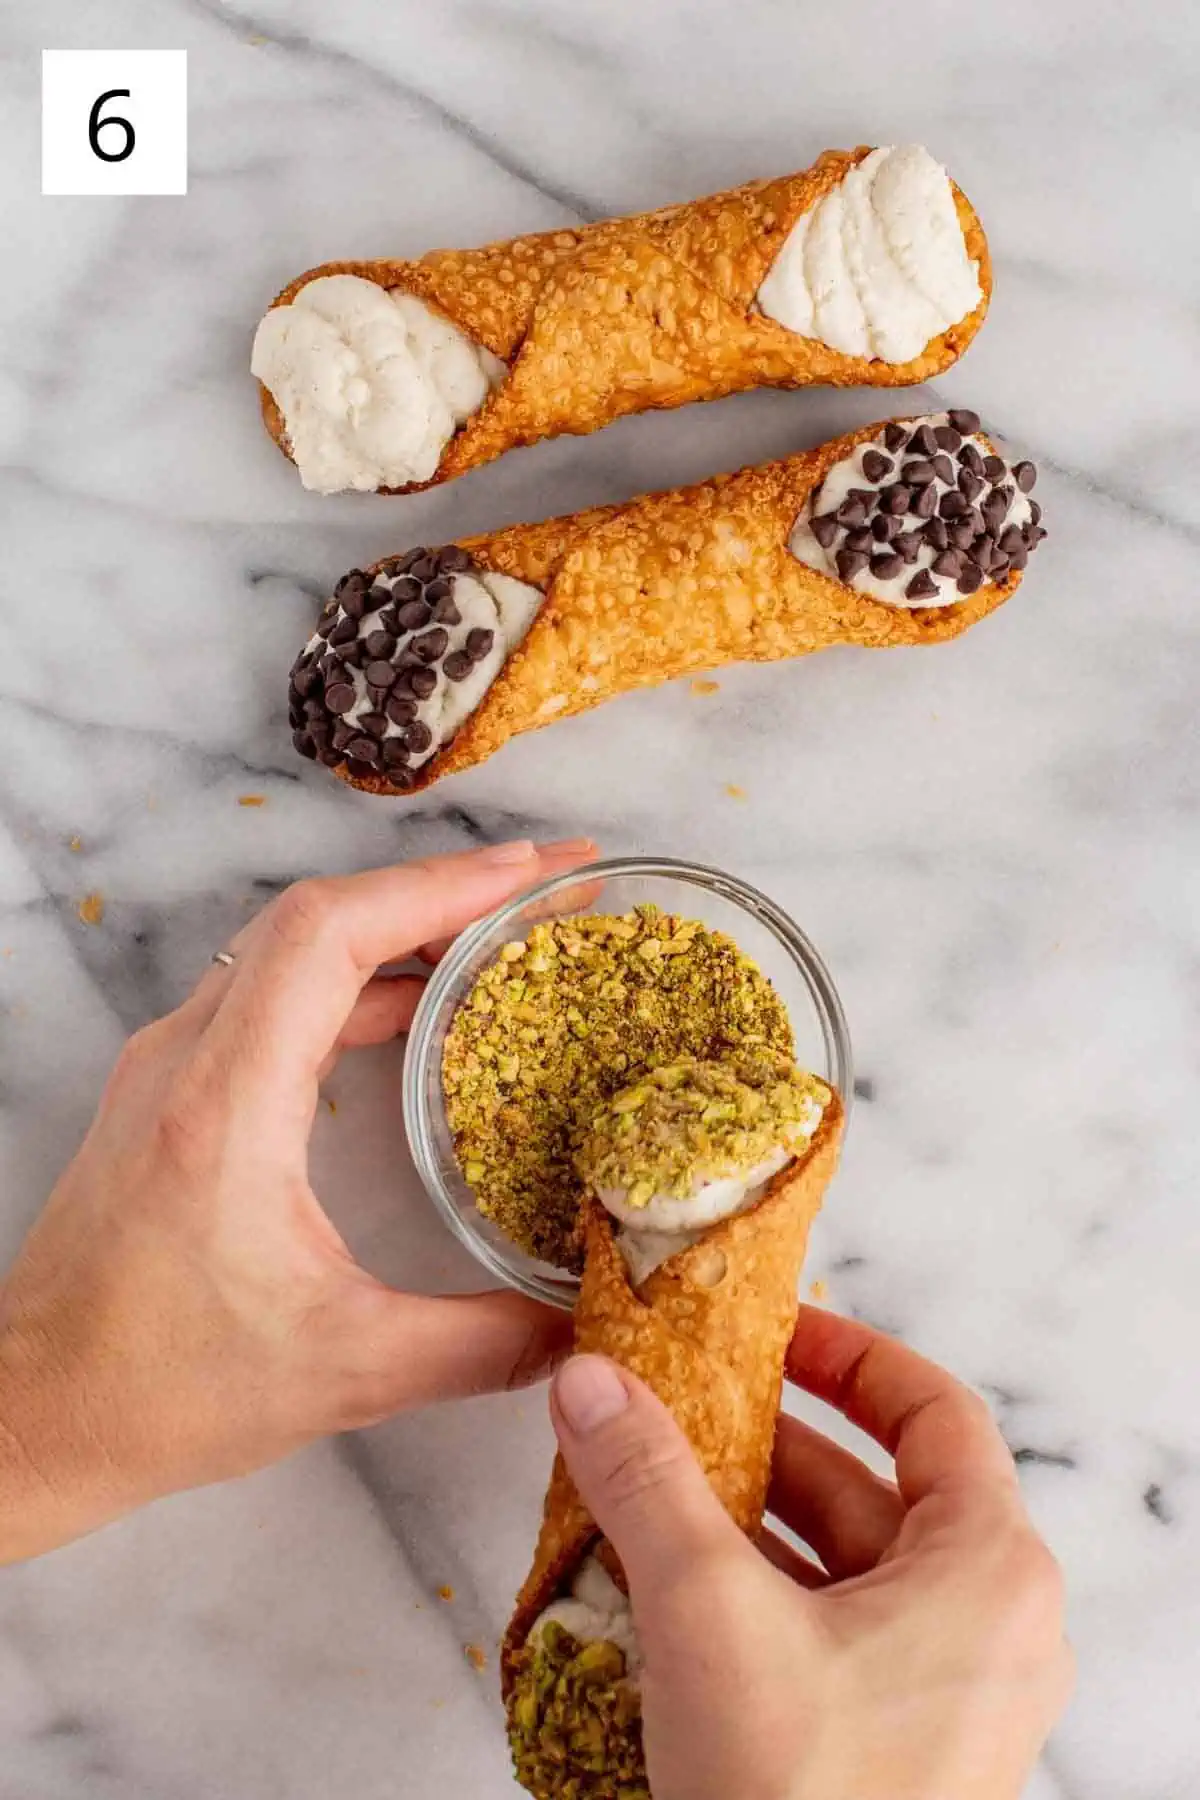 Dipping a cannoli into crushed pistachios.